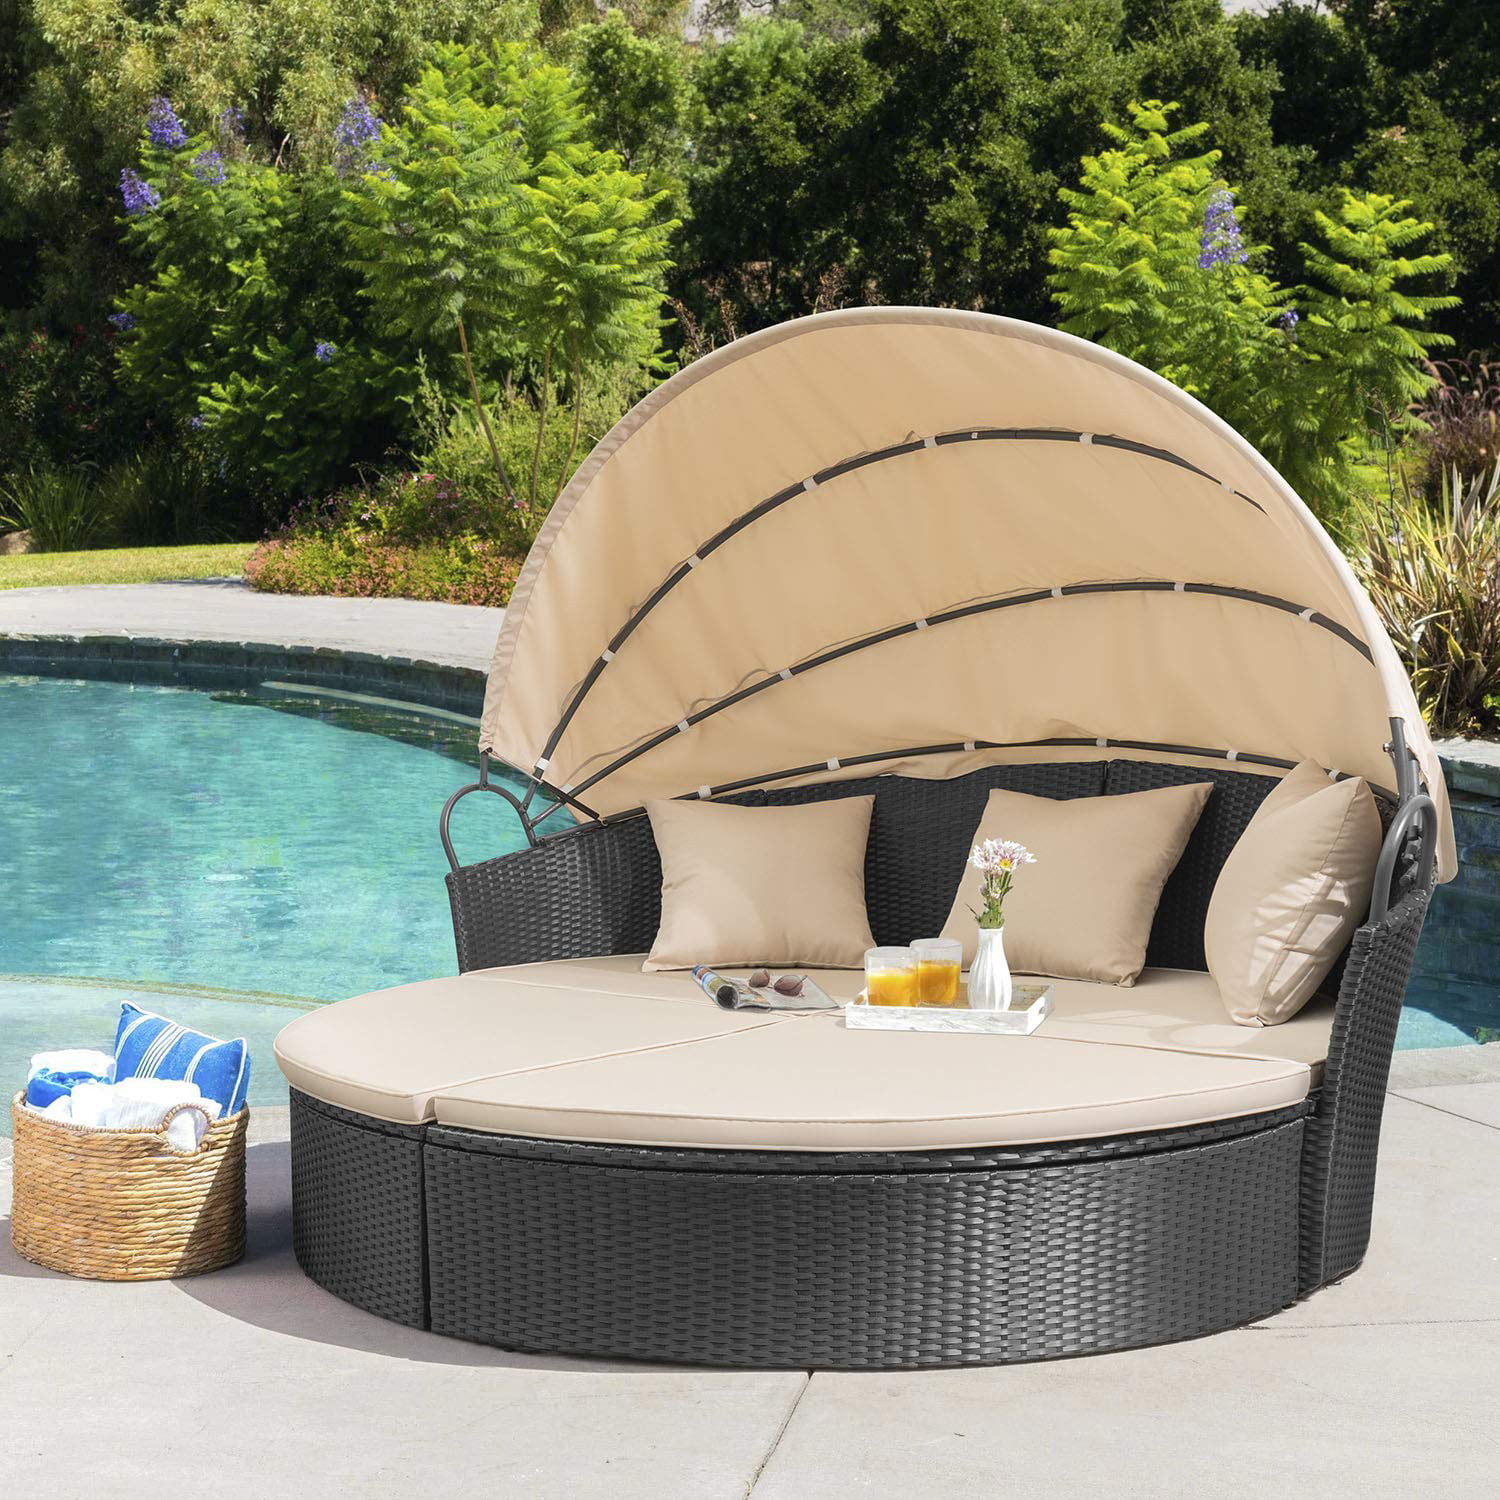 Tangkula Patio Furniture Outdoor Lawn Backyard Poolside Garden Round with Retractable Canopy Wicker Rattan Round Daybed 4 Pillow Beige Seating Separates Cushioned Seats 